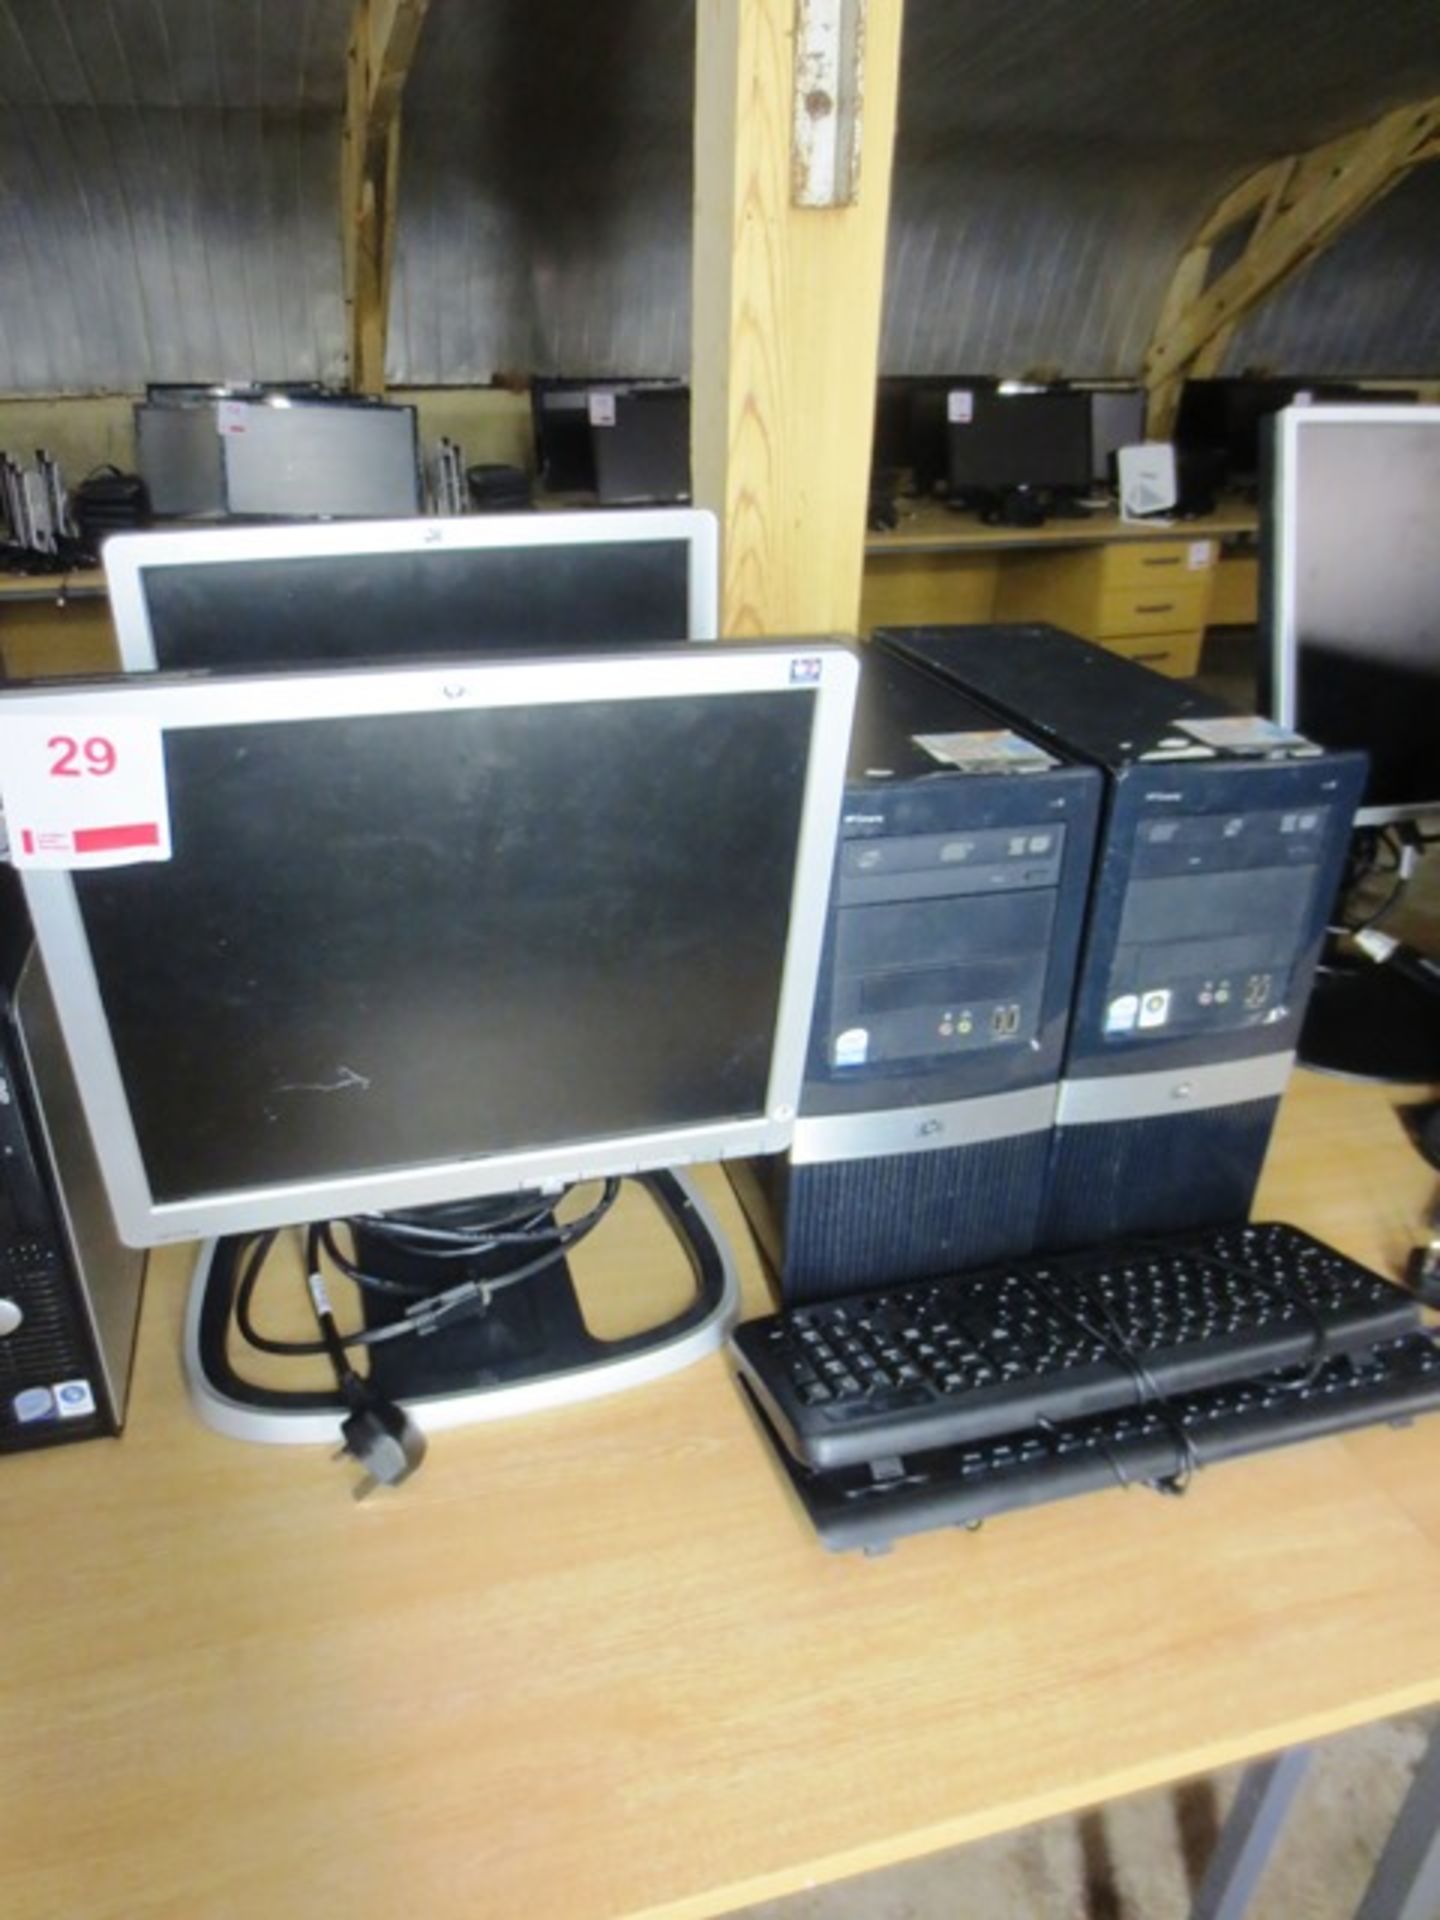 Two HP Compaq DX2400 micro towers, serial nos: 2UA9166FTB, 2AU84968DS, two flat screen monitors,